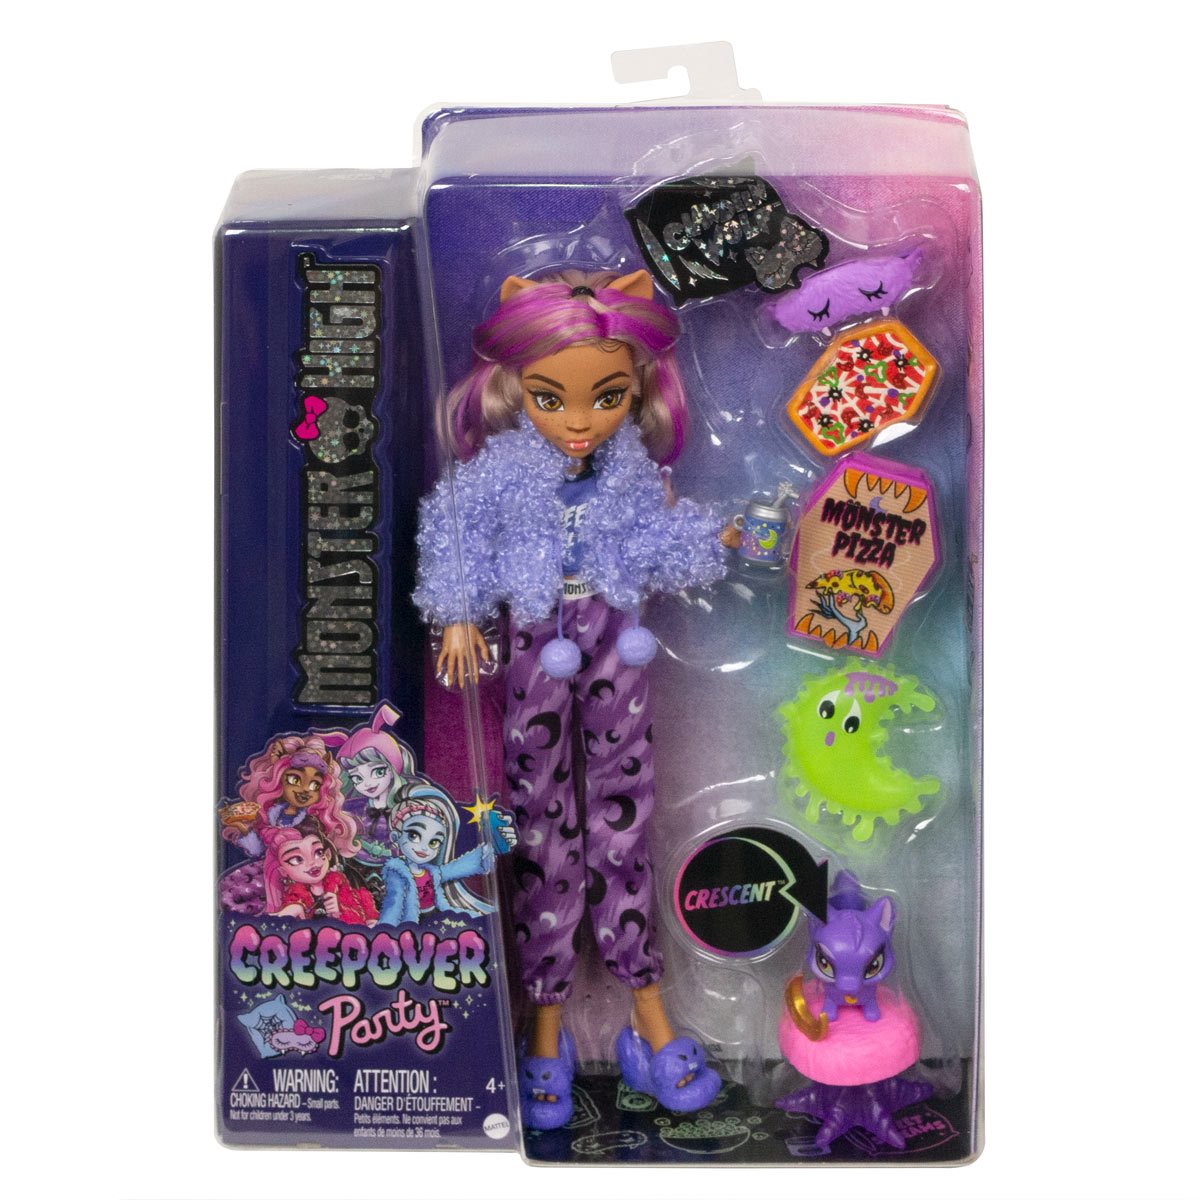 Creepover Party Clawdeen Doll (Scratched Packaging)